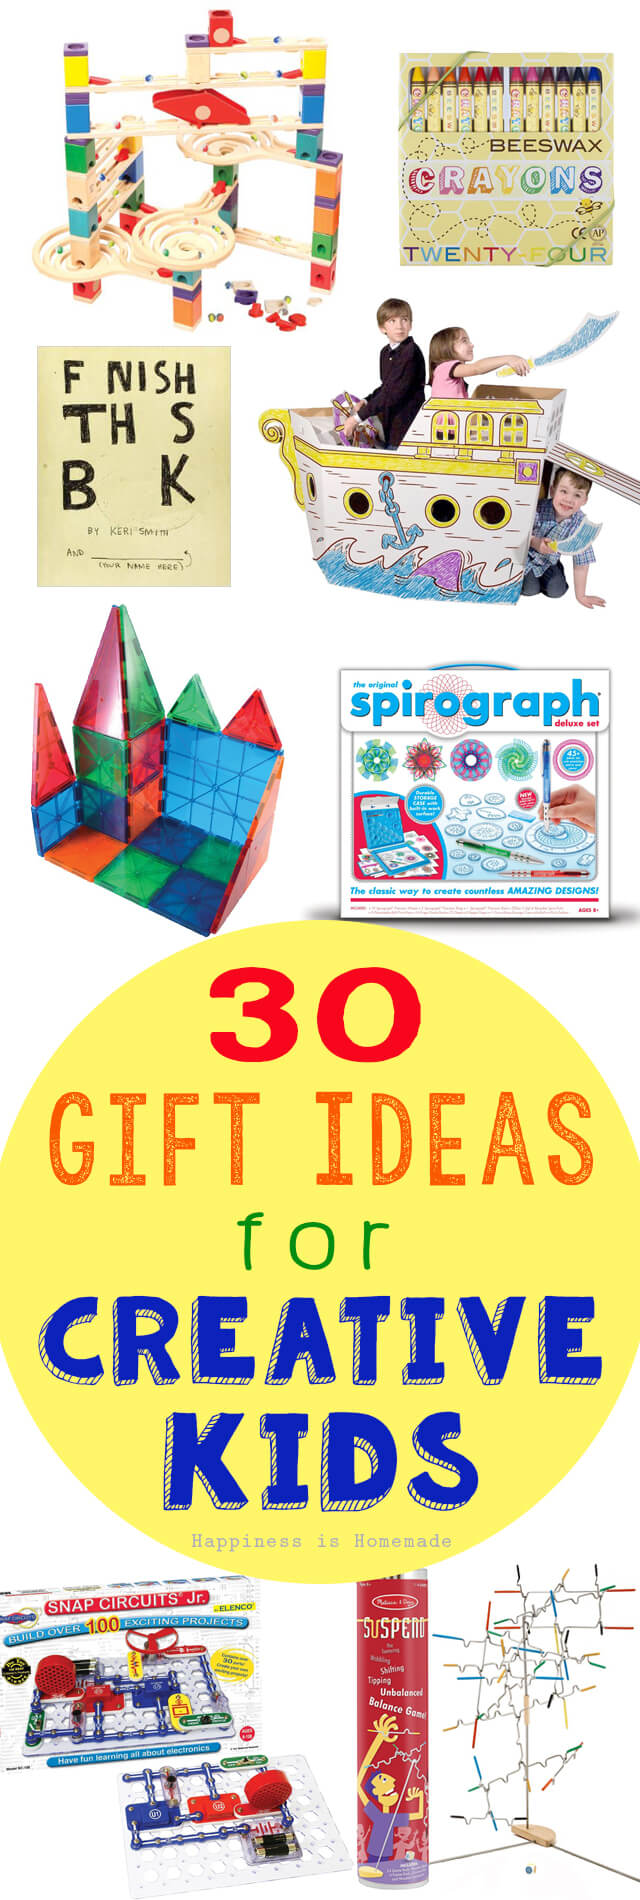 36 Of The Best Gifts For Creative Kids - Thrifty Nifty Mommy